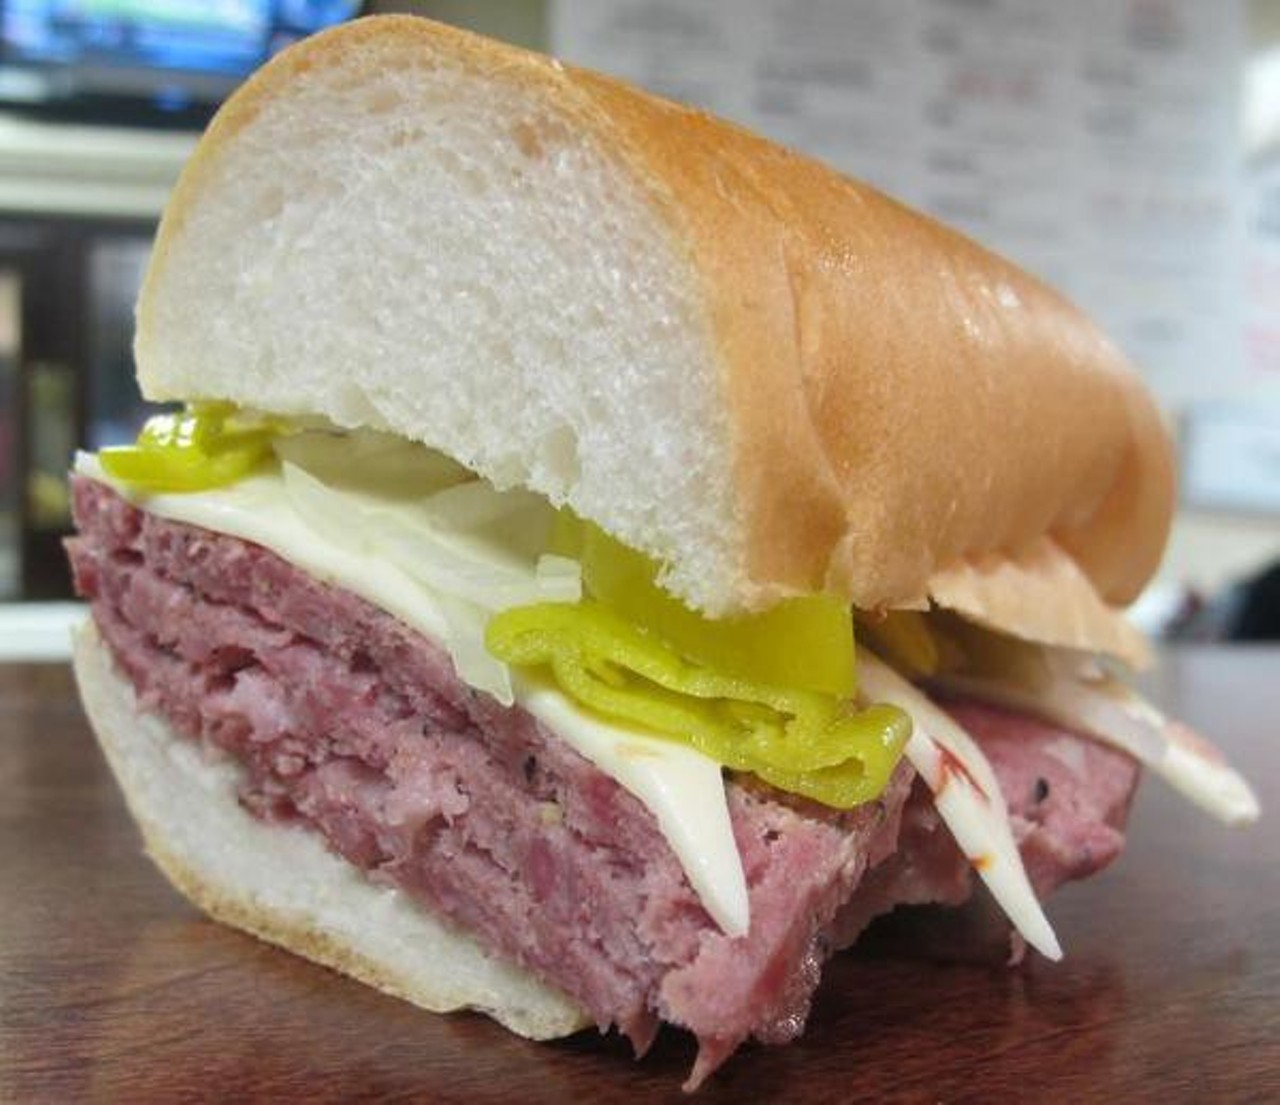 "We make our sandwiches your way," Gioia's menu declares -- which means you get to pick your sandwich in addition to the type of bread, cheese, garnishes and condiments. No matter which combo you choose, it's bound to be delicious. Photo by Mindee Zervas.